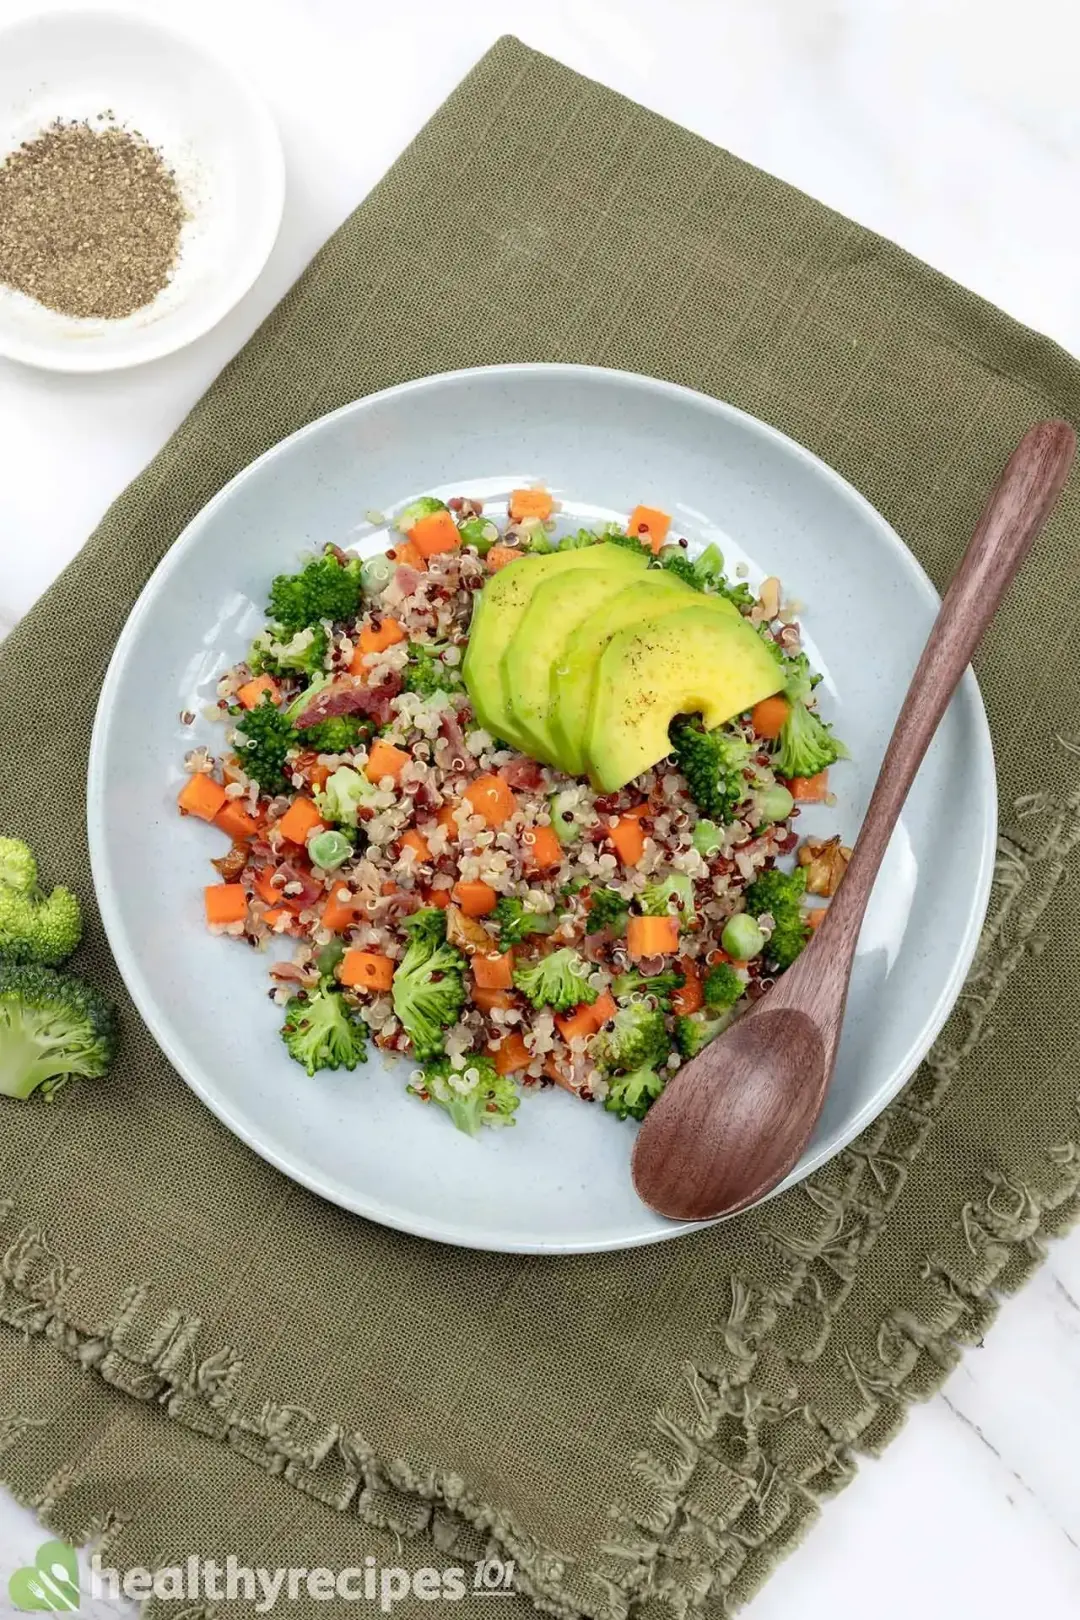 A plate of quinoa salad with avocado slices in a white plate on a green kitchen cloth with a wooden spoon